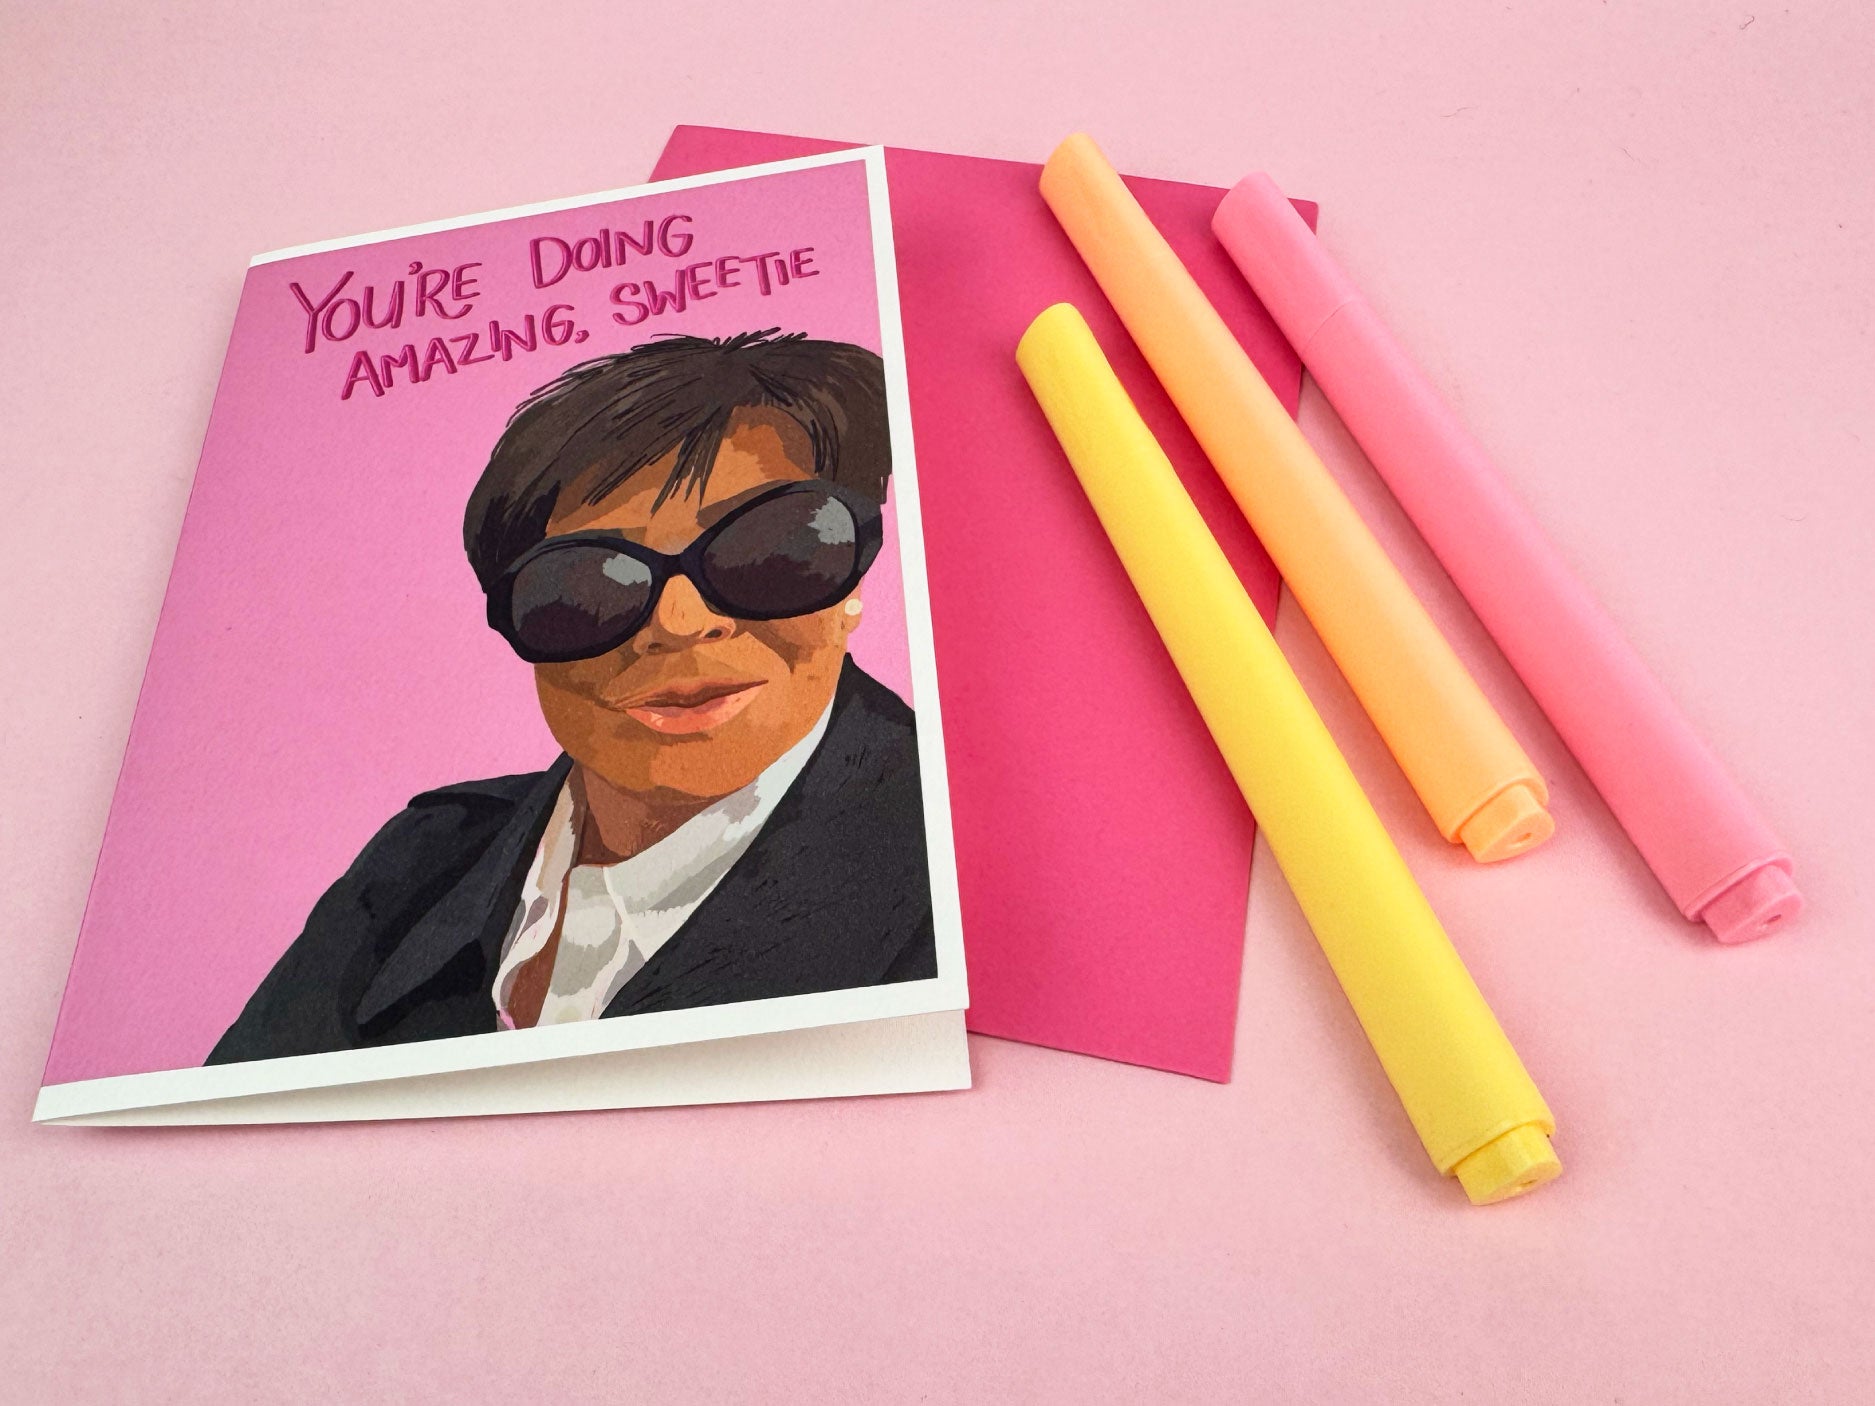 You're doing amazing, Sweetie - Greeting Card